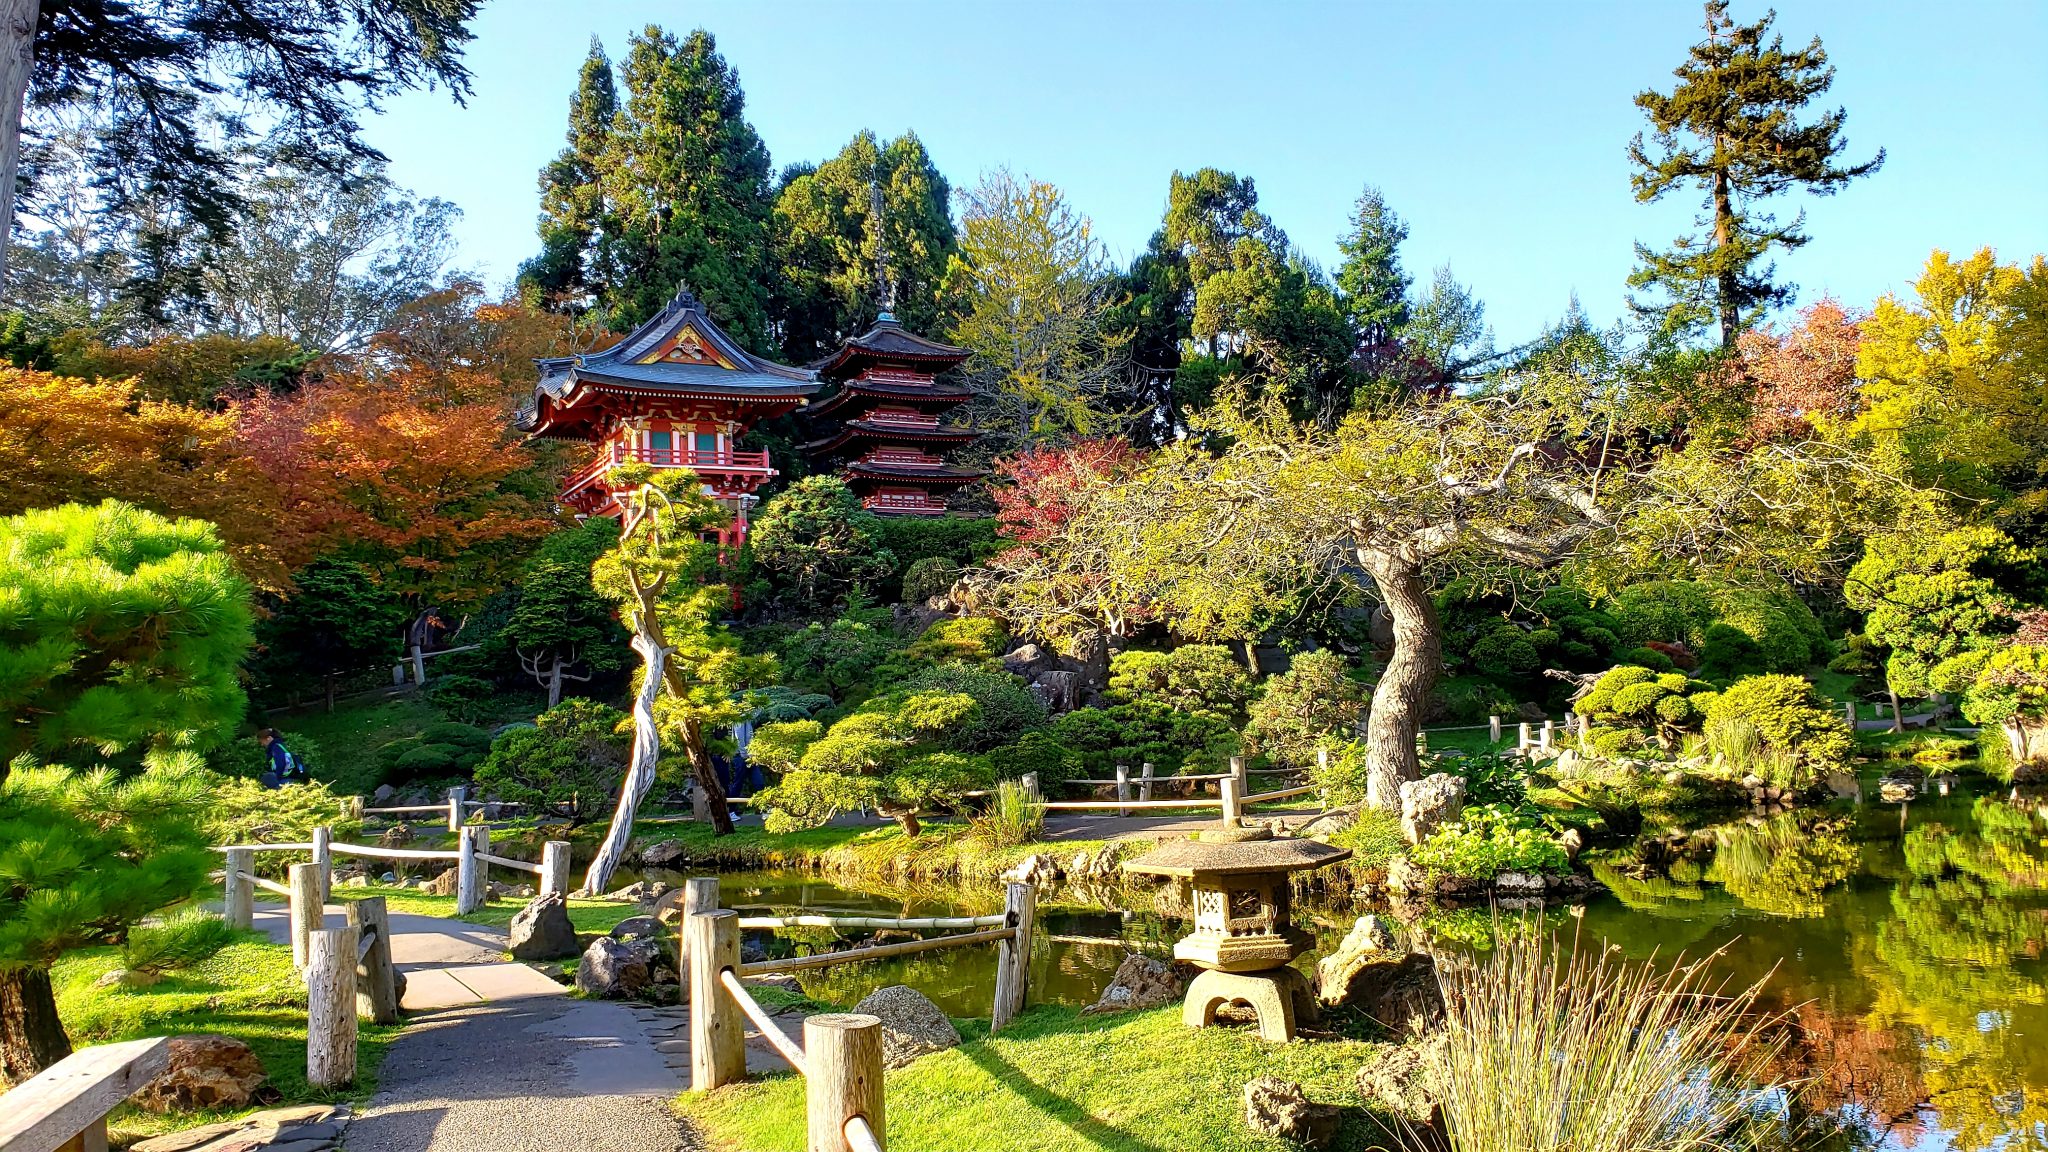 Why explore San Francisco’s Japanese Tea Garden | Road Trip and Travel